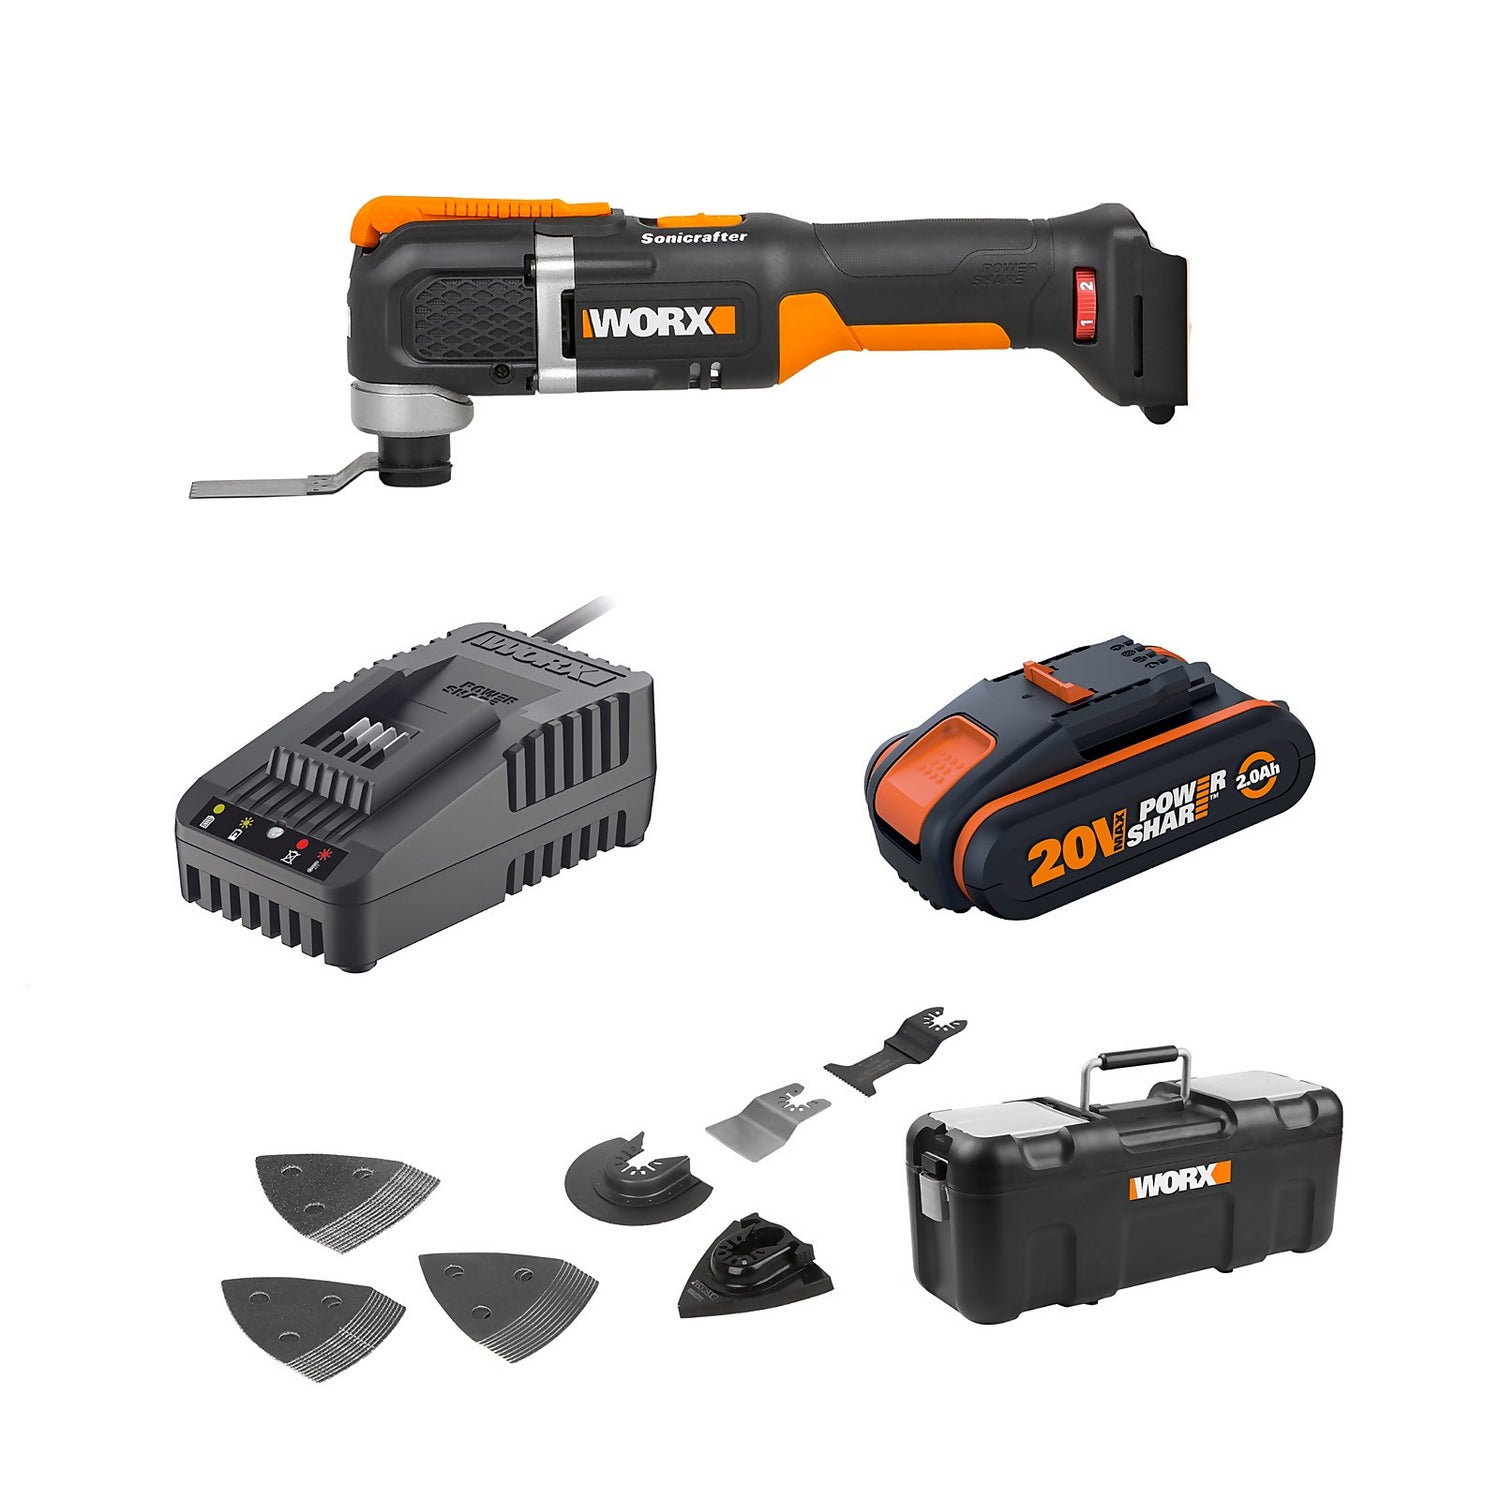 Worx WX696 20v 2.0Ah Sonicrafter Cordless Oscillating Multi Tool Homebase